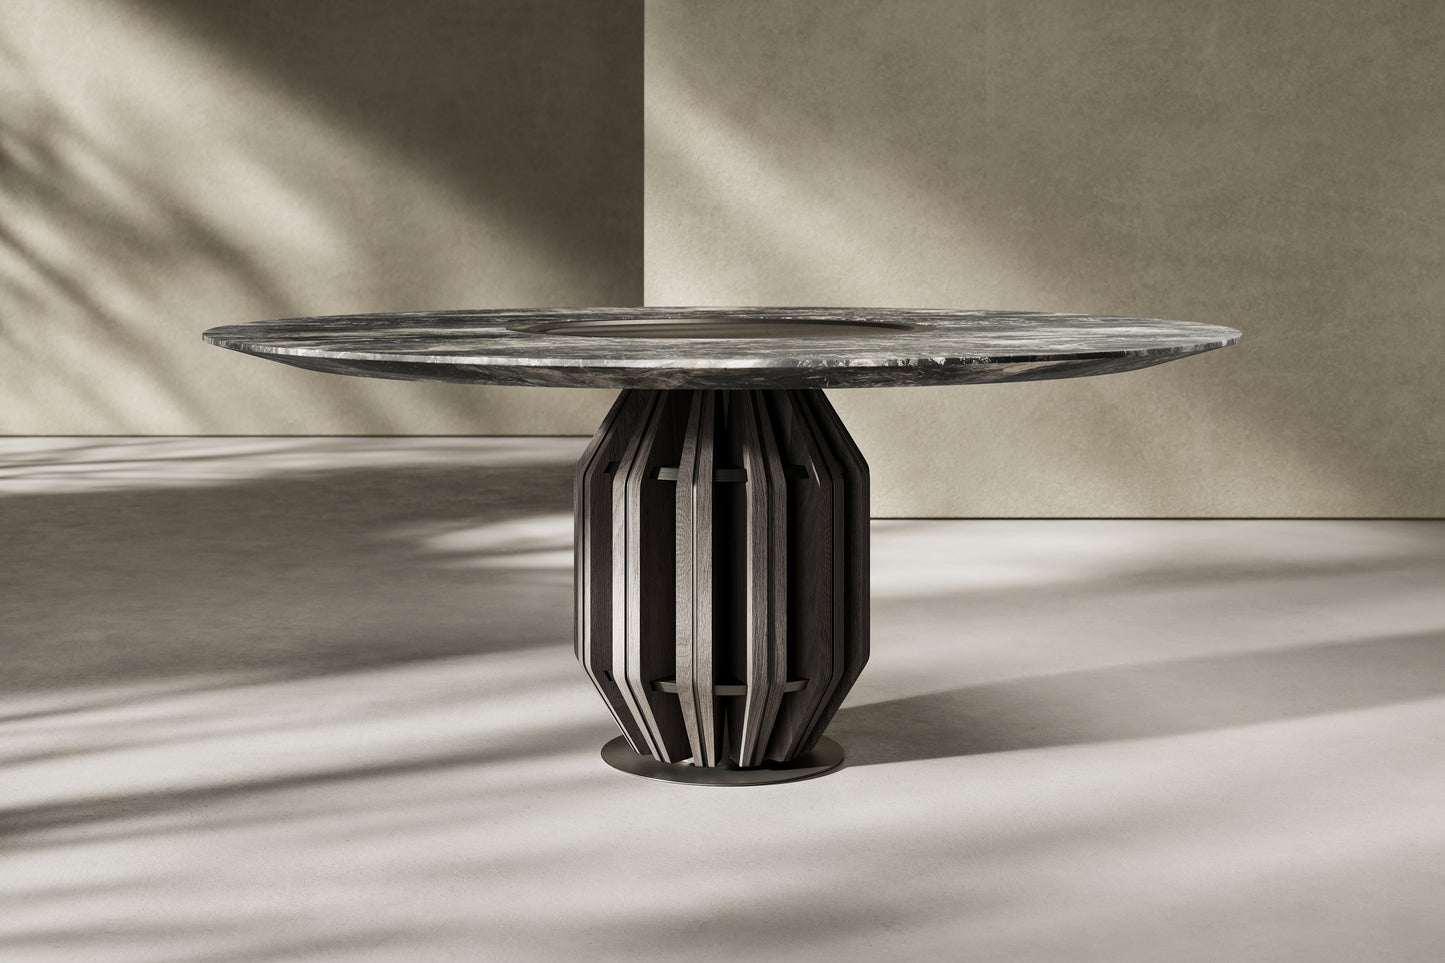 TROPEA DINING TABLE | COLLECTION PIETRA CASA | QUOTE BY REQUEST